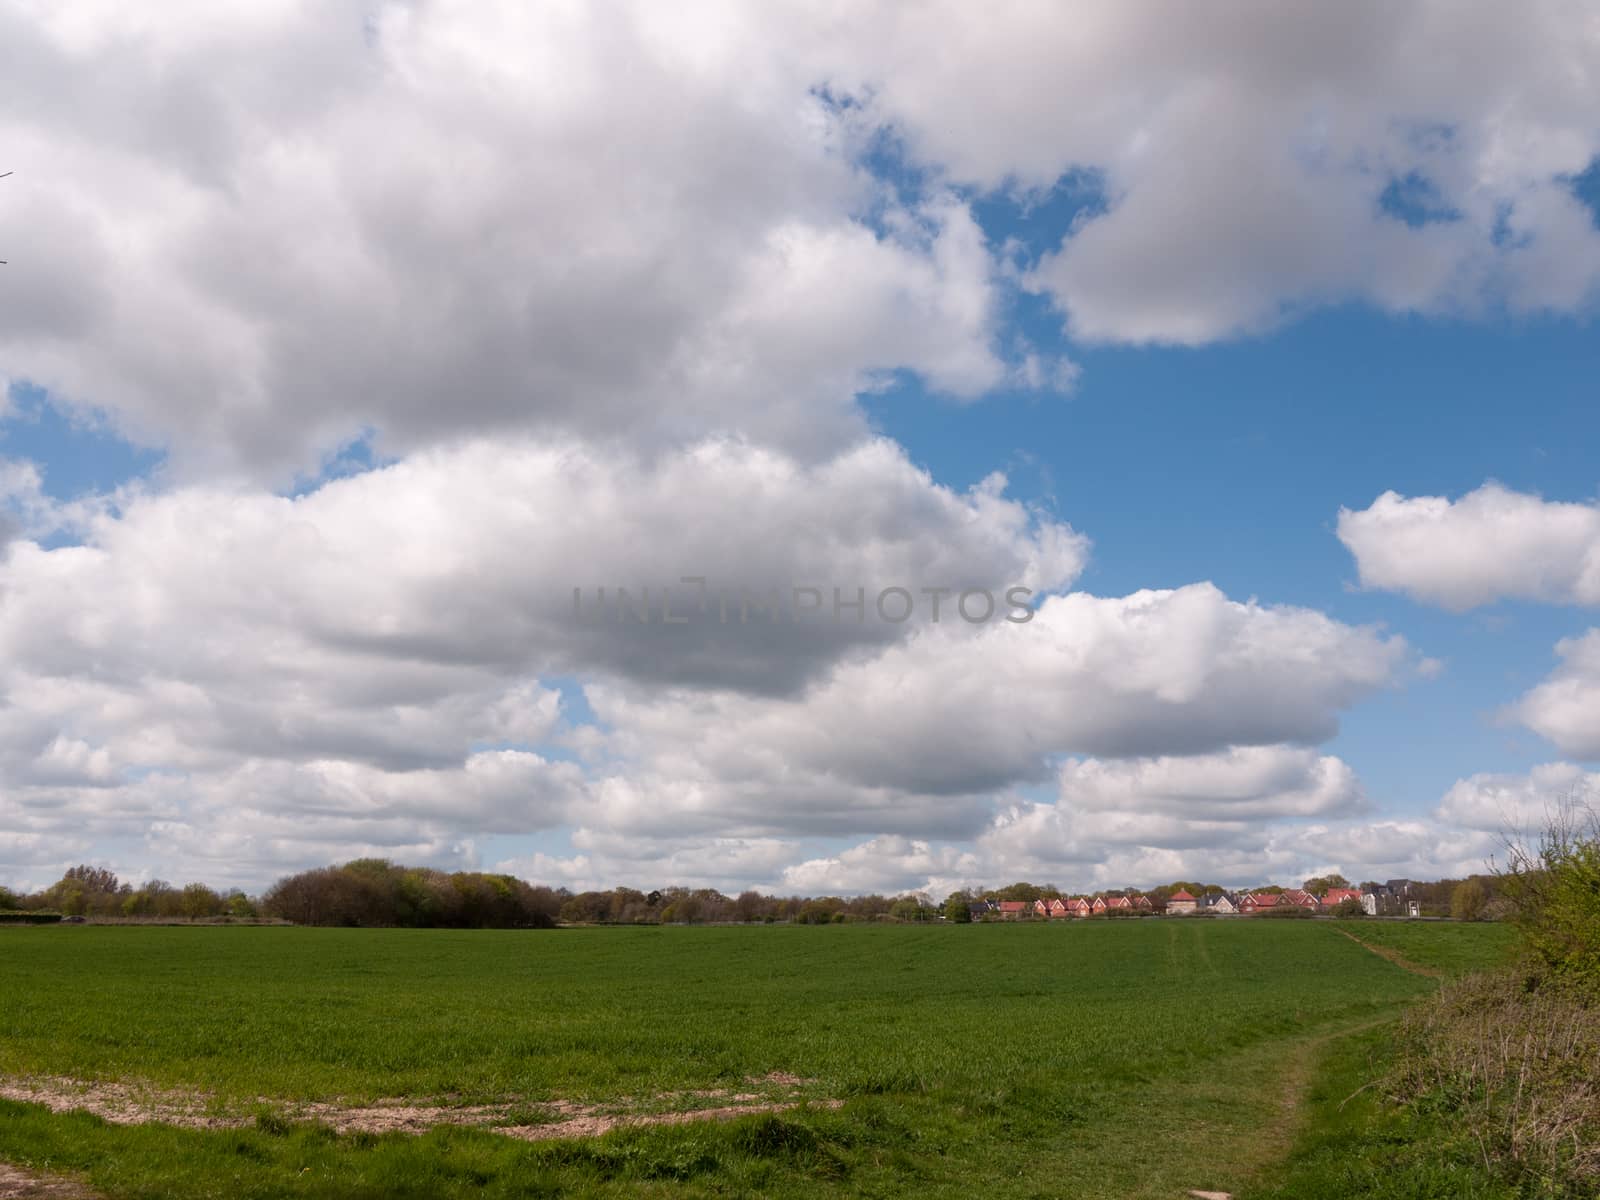 A Lovely Lush Meadow on A Clear Sping Day with Beautiful Clouds and Farm Fields of Plenty of Green Grass and open Space, Freedom and Happiness, and Wellbeing, nobody around, at peace and in heaven